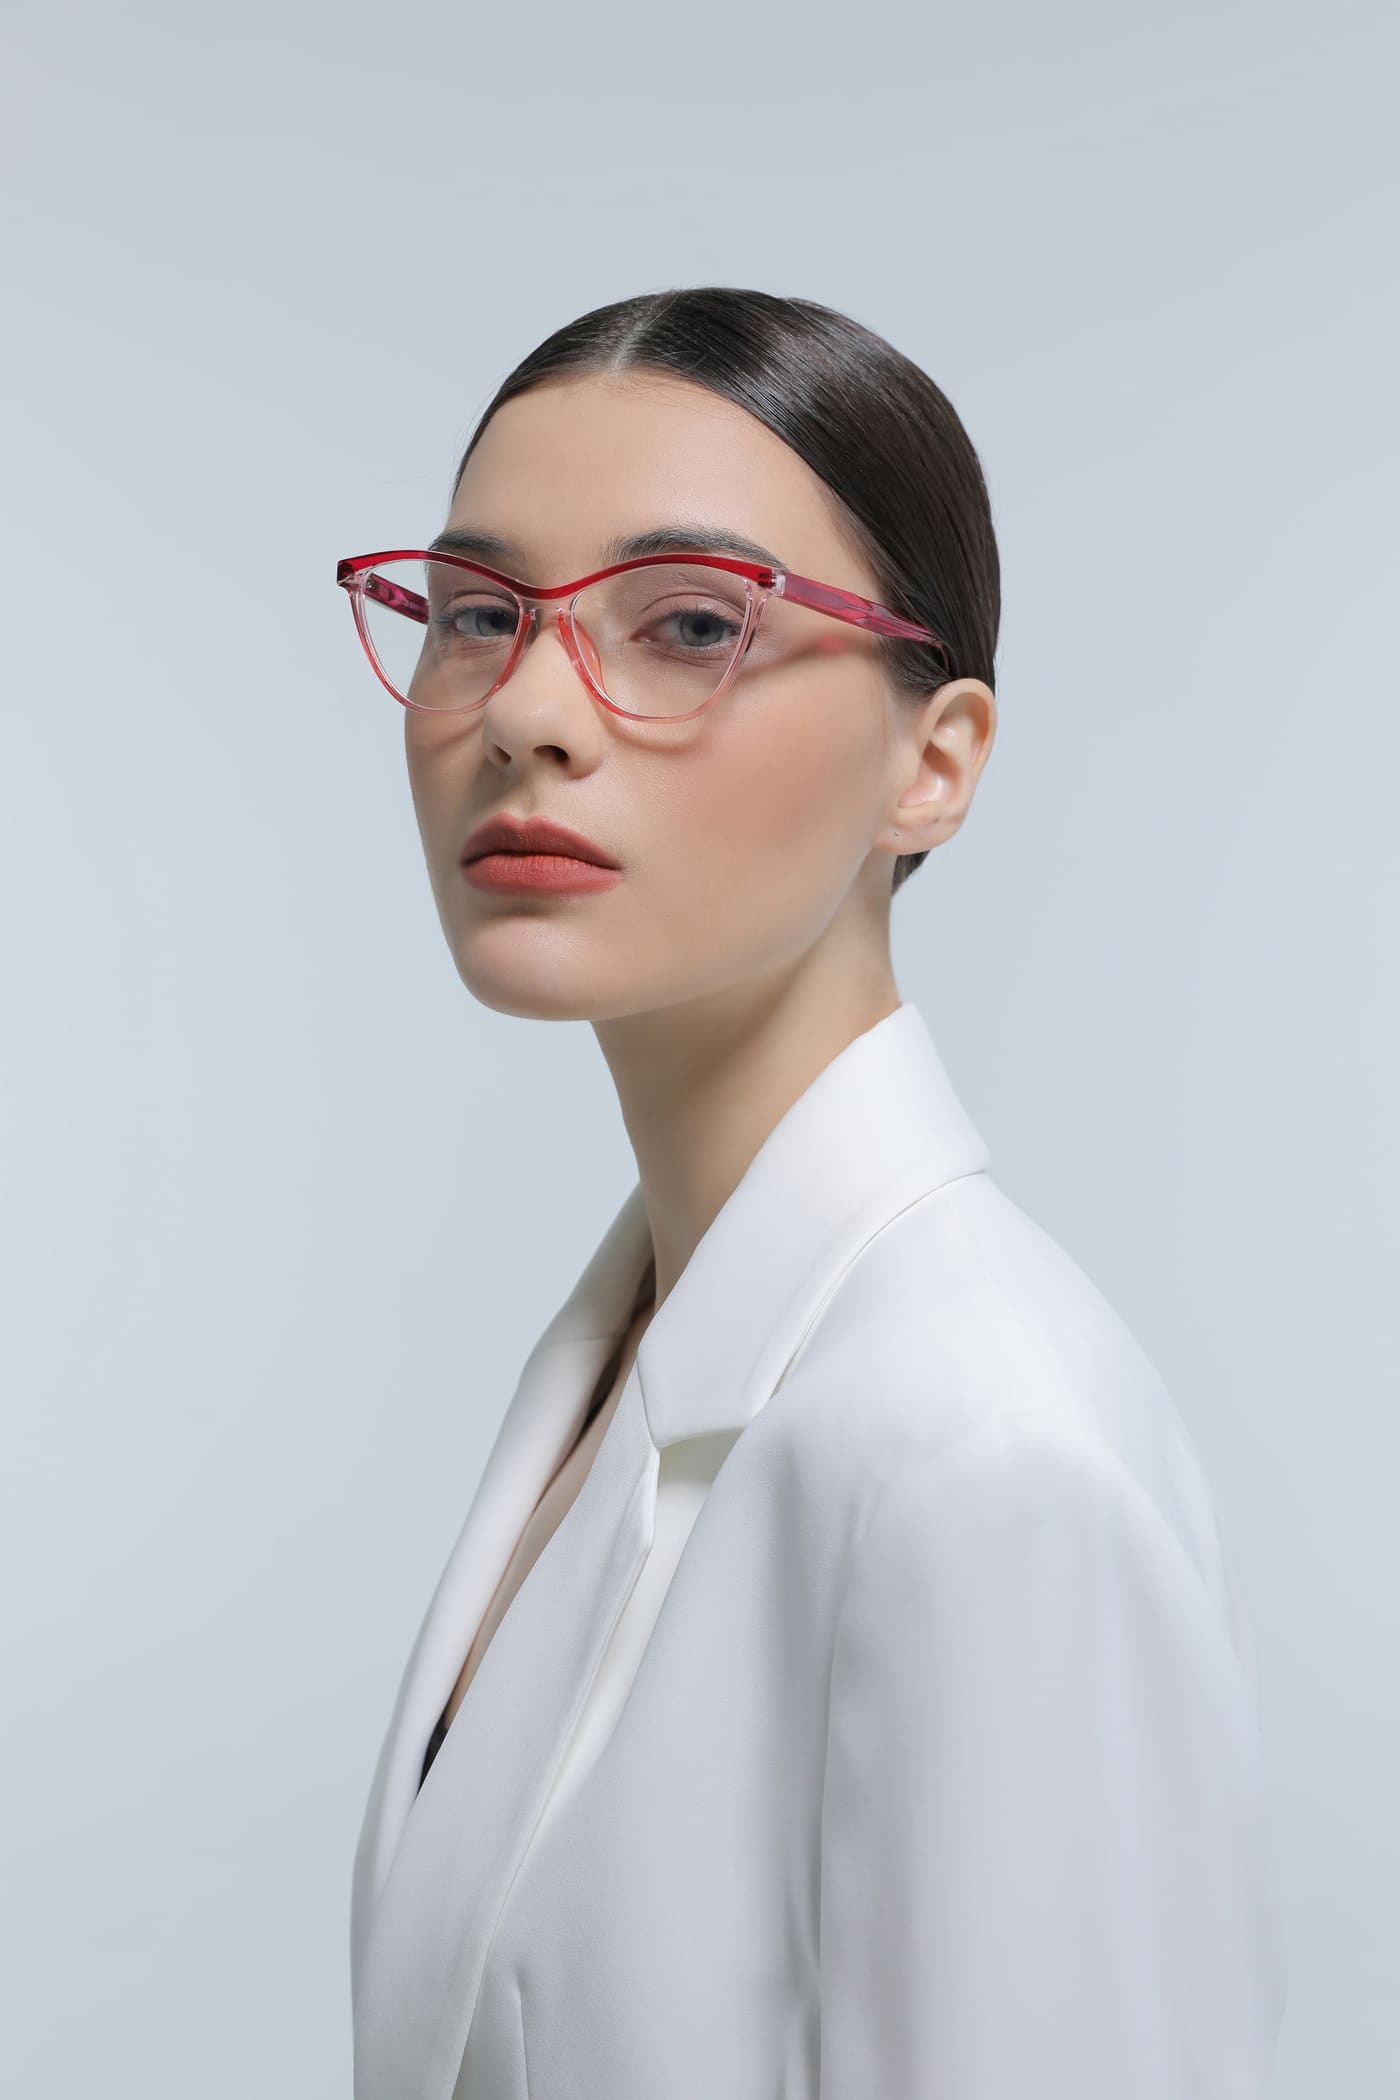 Select from Giustizieri Vecchi's Wide Array of Blue Light Glasses to Shield Your Eyes and Boost Screen Comfort